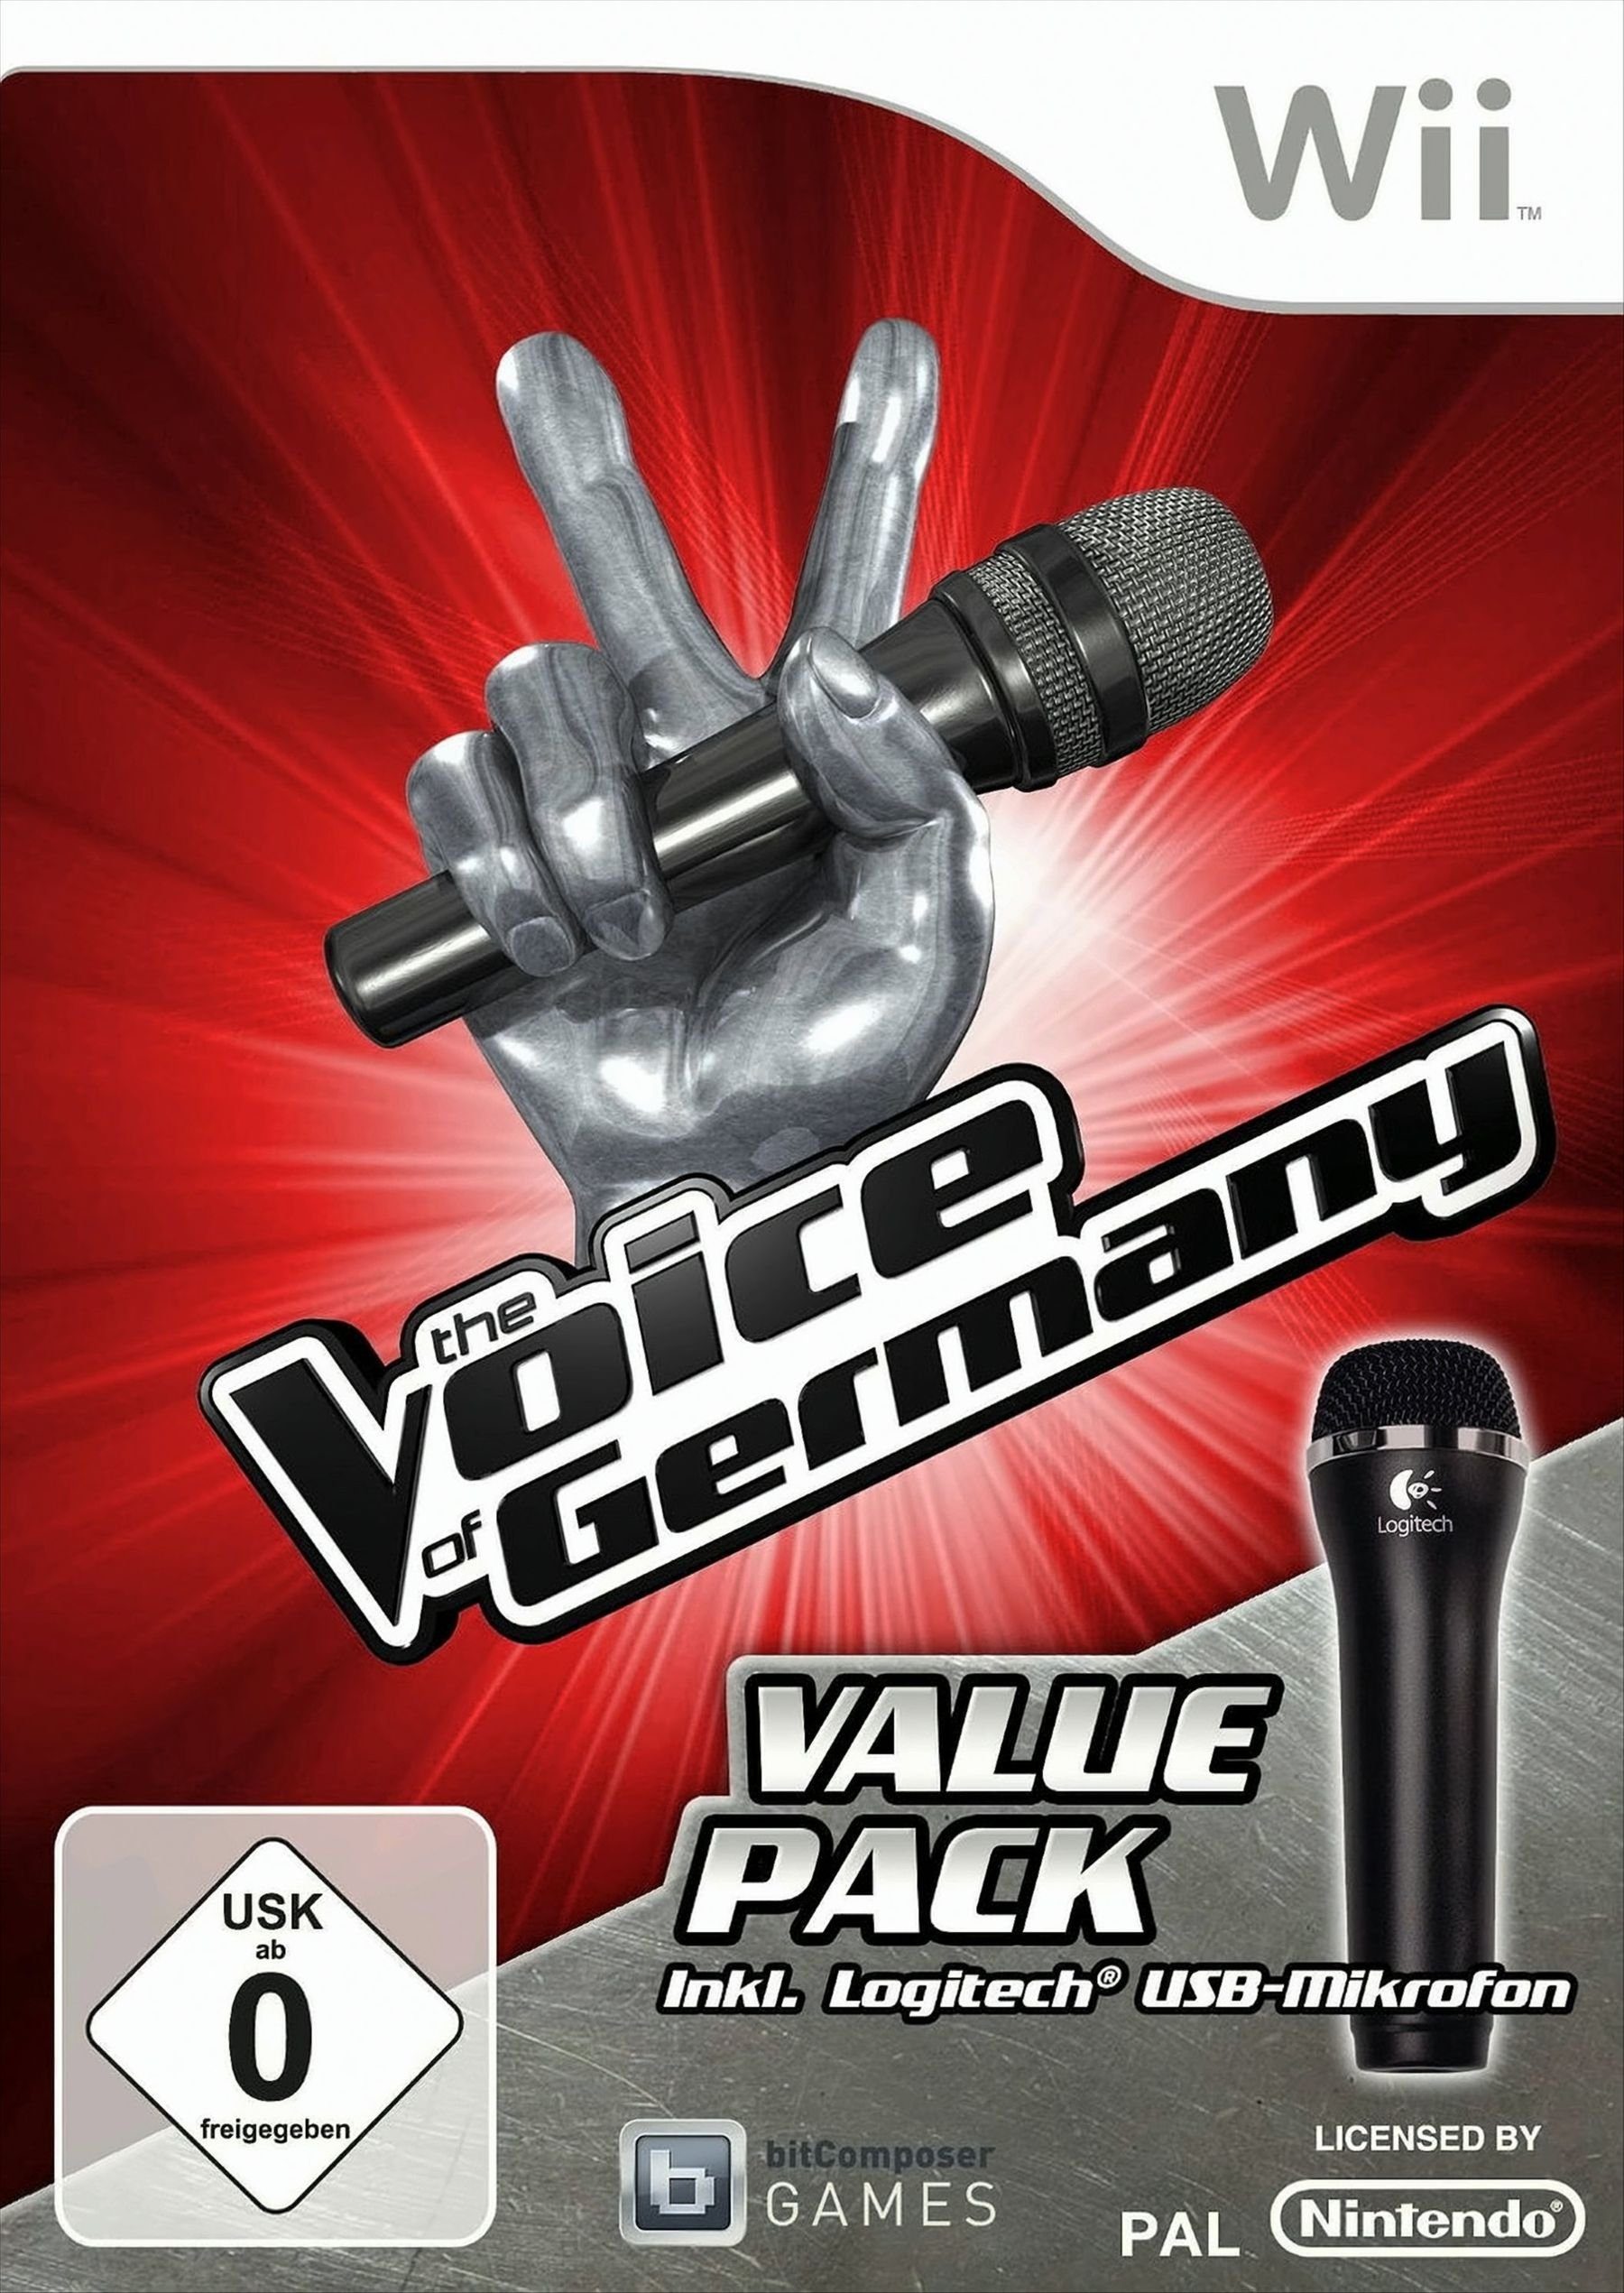 The Voice Of Germany - Value Pack inkl. 1 Mikrofon Nintendo Wii